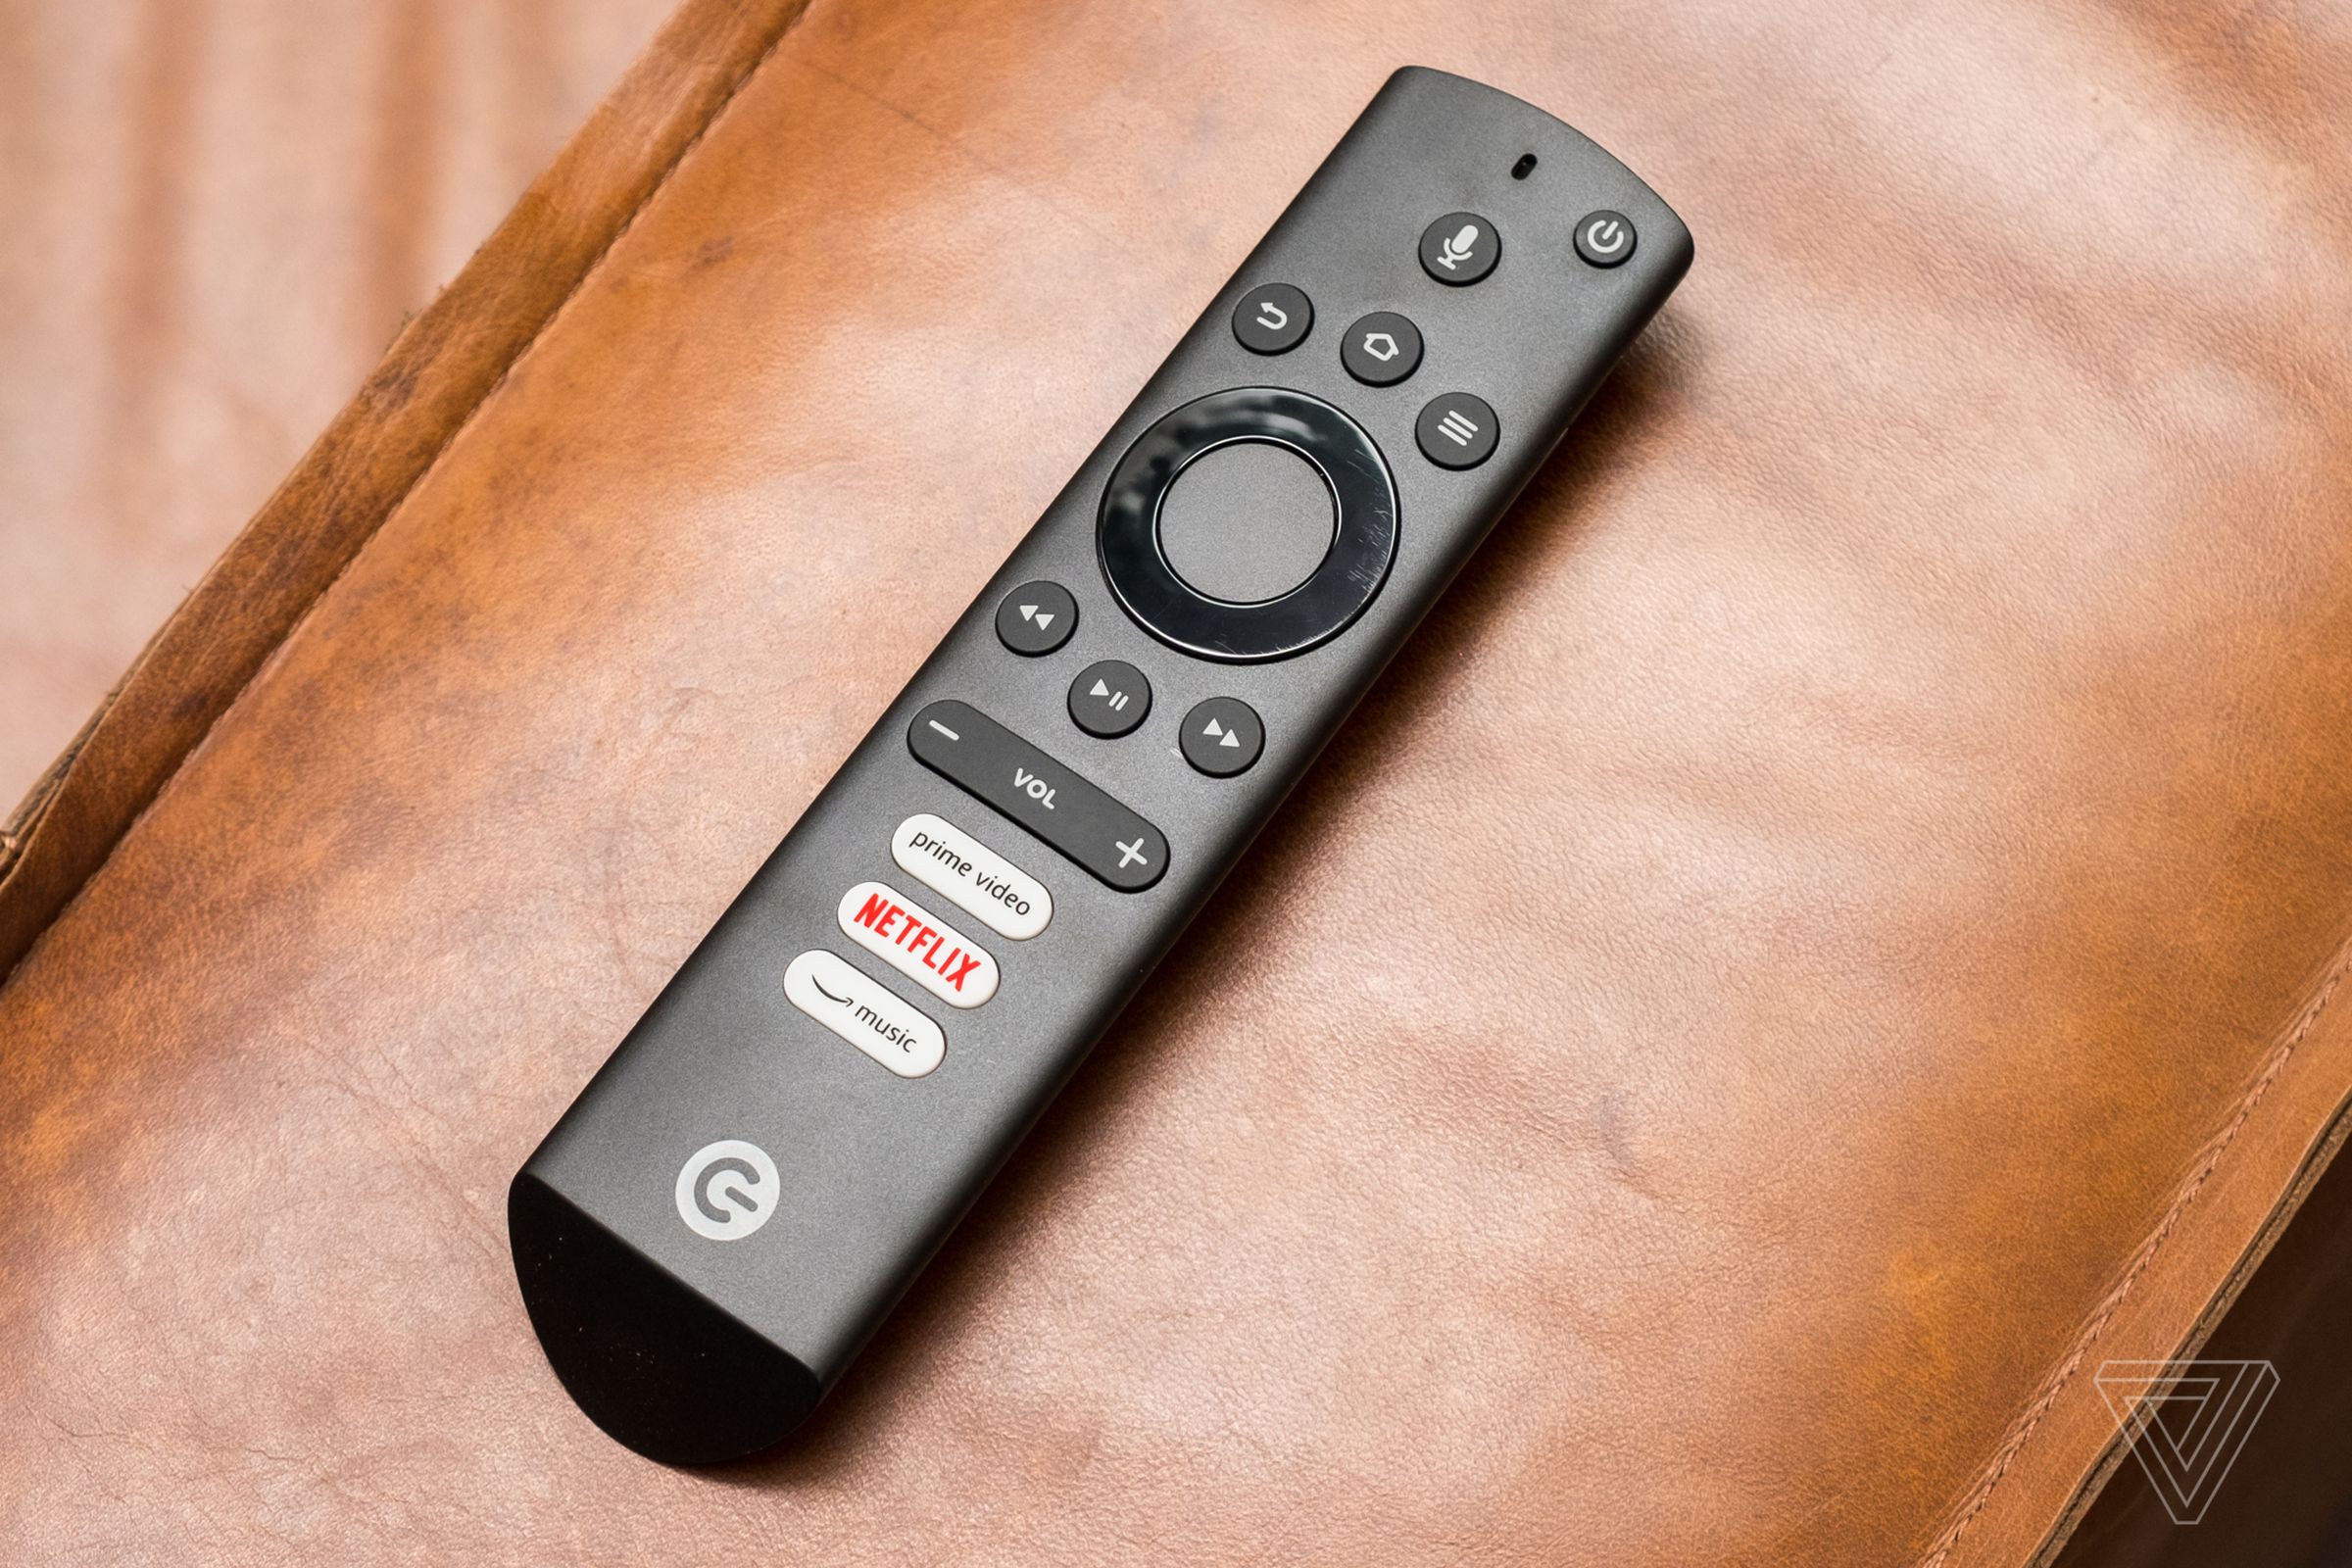 The included remote is very similar to the one that comes with Fire TV devices.